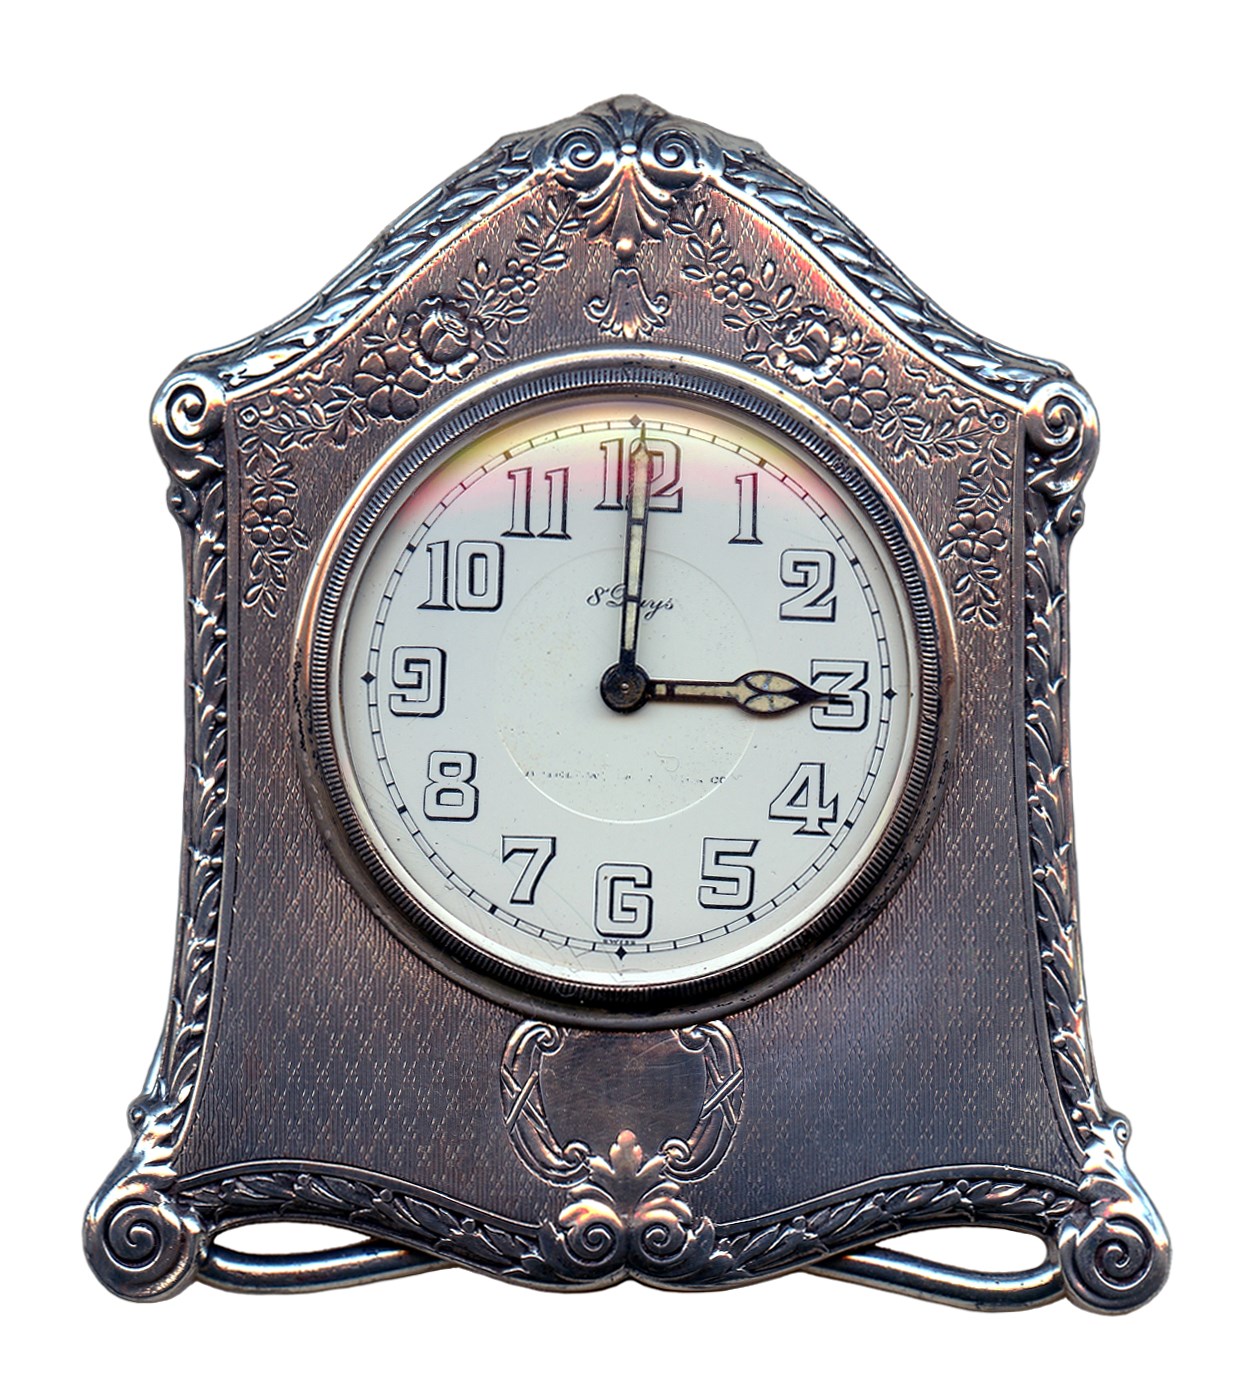 Small clock with silver frame and feet, set to 3:00